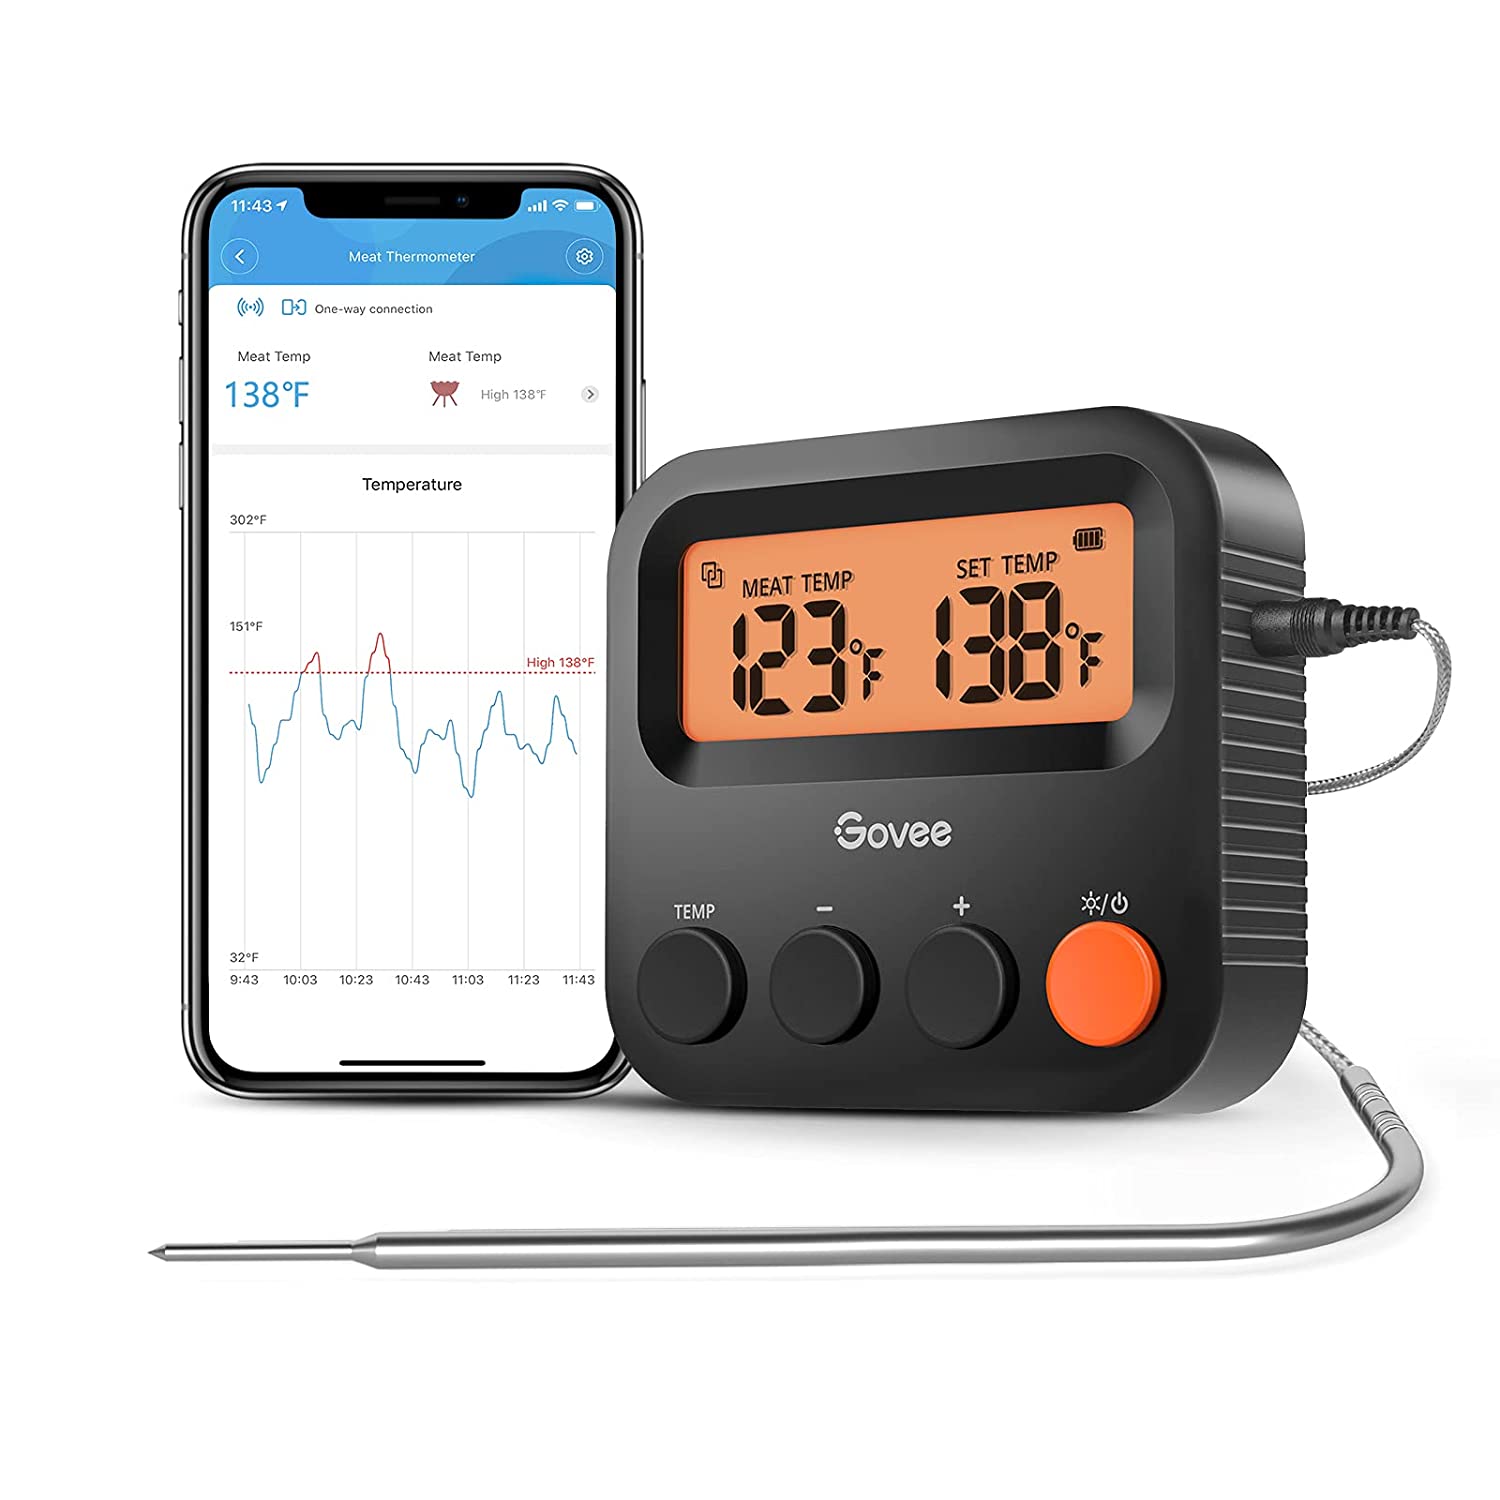 Govee 230ft Range Wireless Bluetooth Meat Thermometer with one Temperature Probe and Smart Alerts for Smoker ,Cooking, BBQ, Kitchen, Oven - $10.99